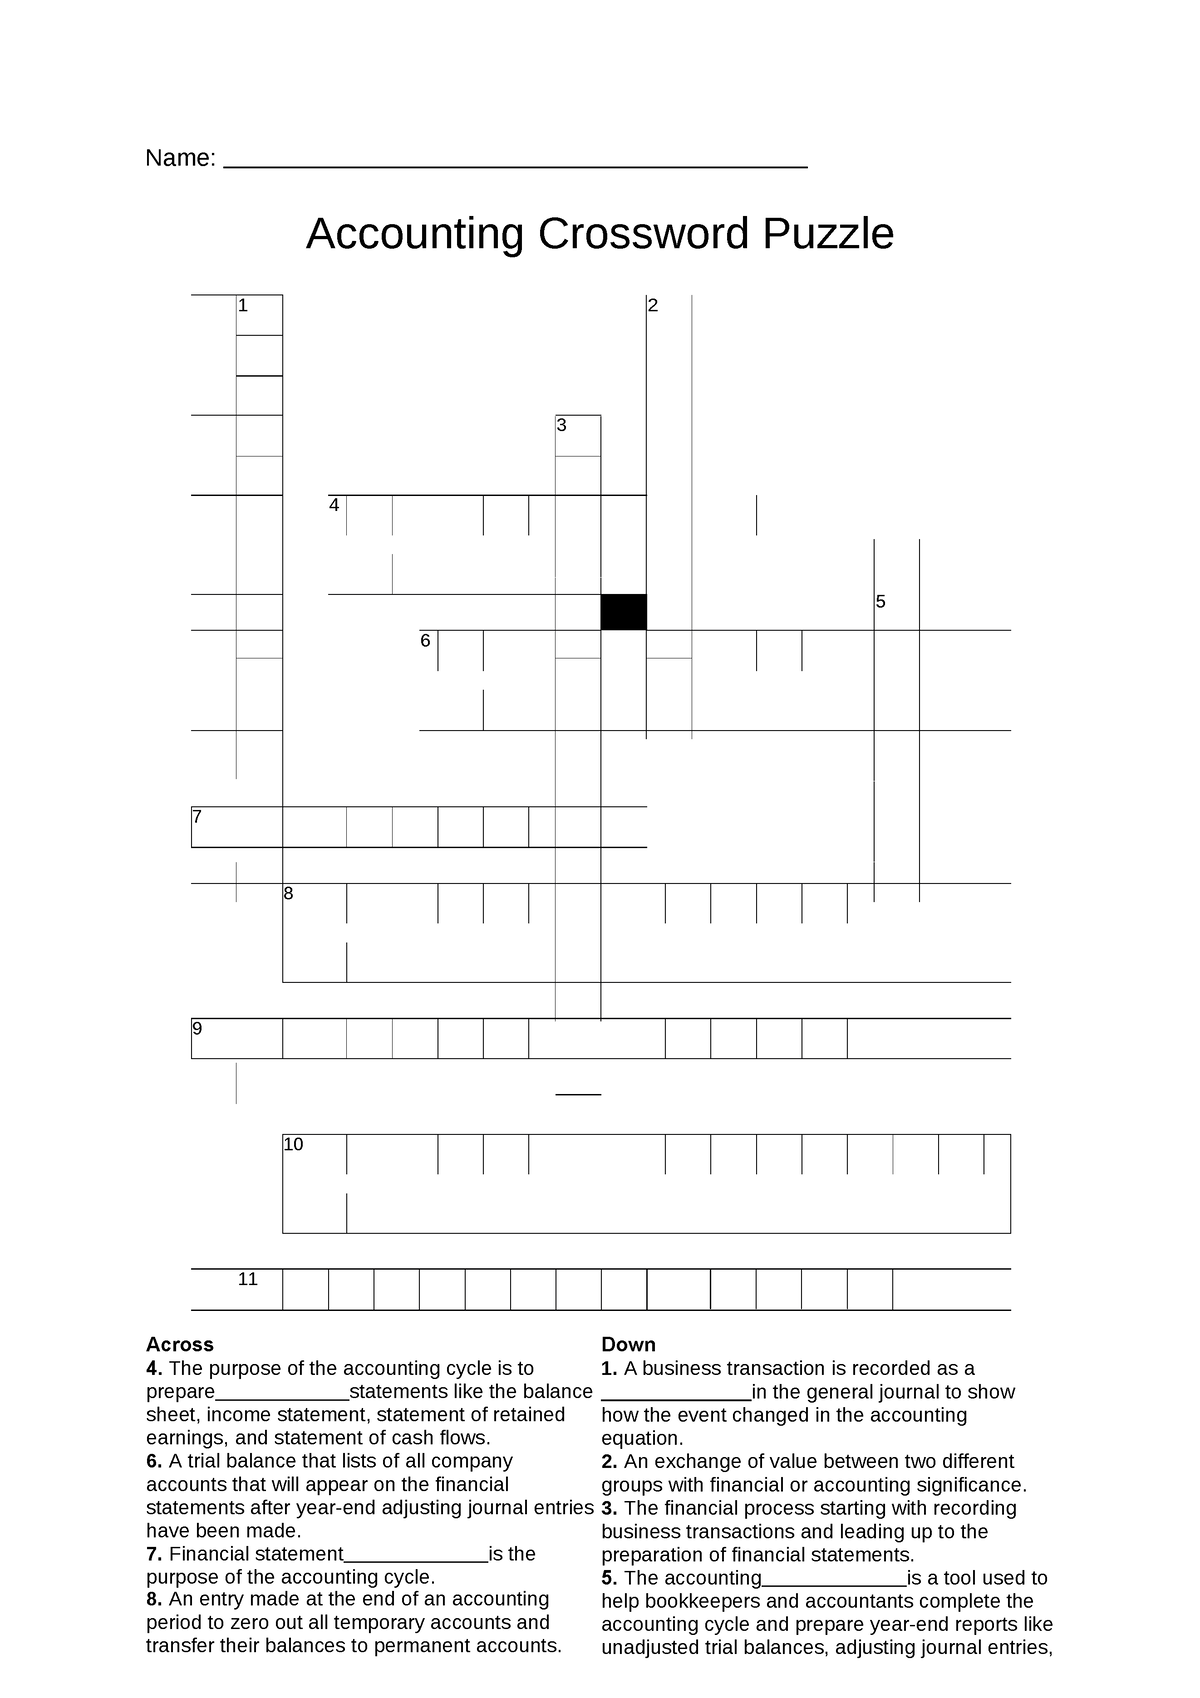 Accounting cycle Crossword Puzzle Name: Accounting Crossword Puzzle 1